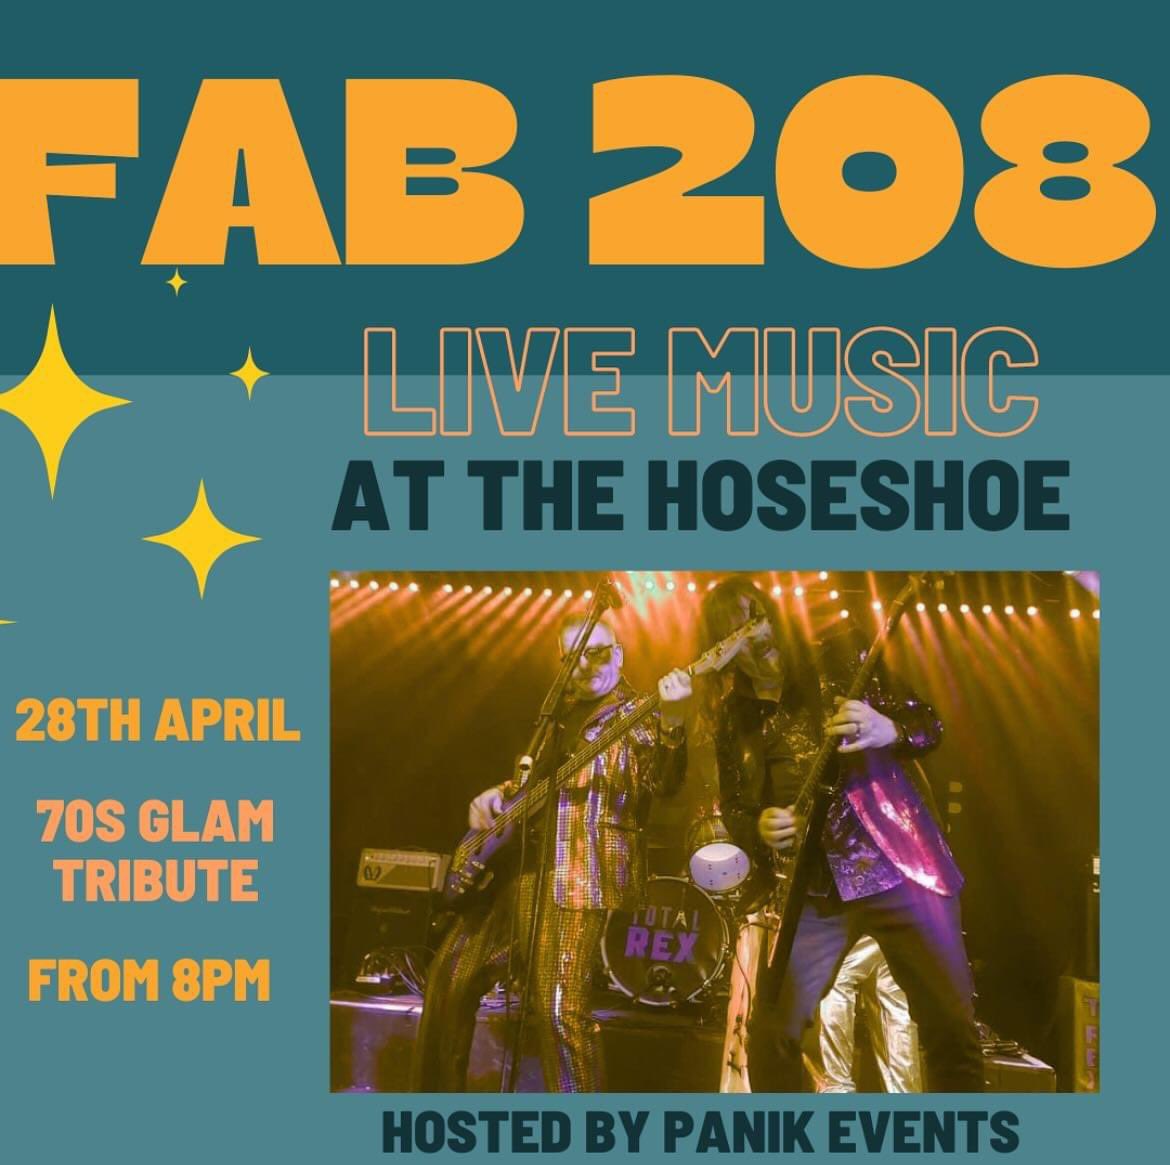 Sun Apr 28th ..it’s a 70s Night in #downend with FAB 208 live at the Horseshoe! @DownendCricket @downendvoice @CJHoleDownend #downend @DownendFlyrsGrl #glamrock #70sglam